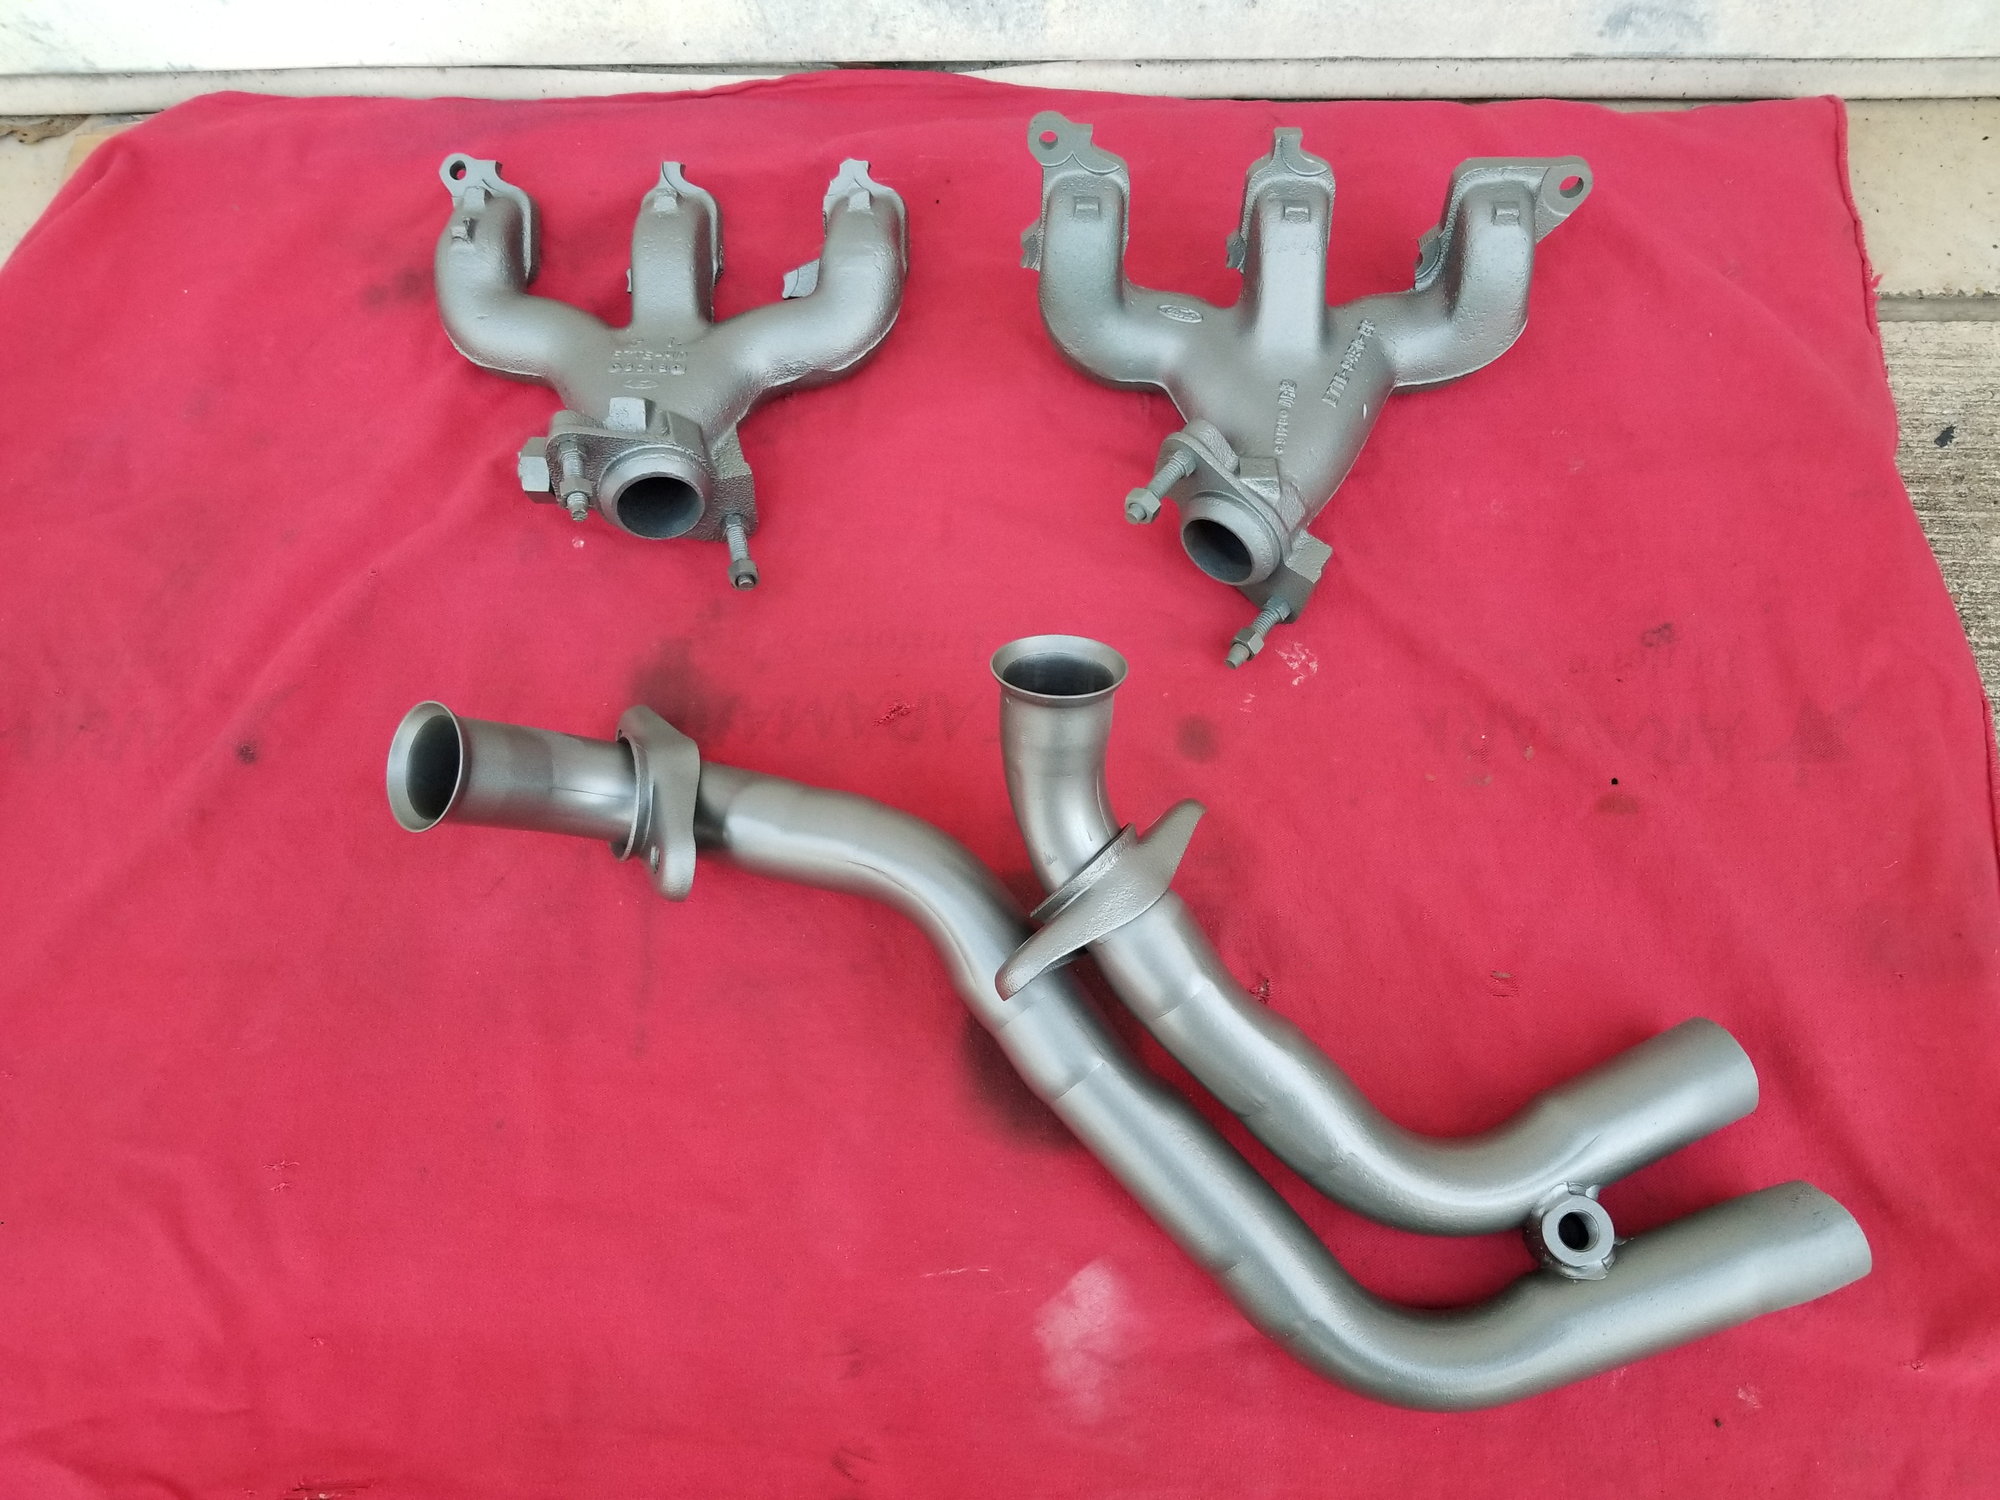 Six Cylinder Exhaust Manifold Gaskets - Ford Truck Enthusiasts Forums